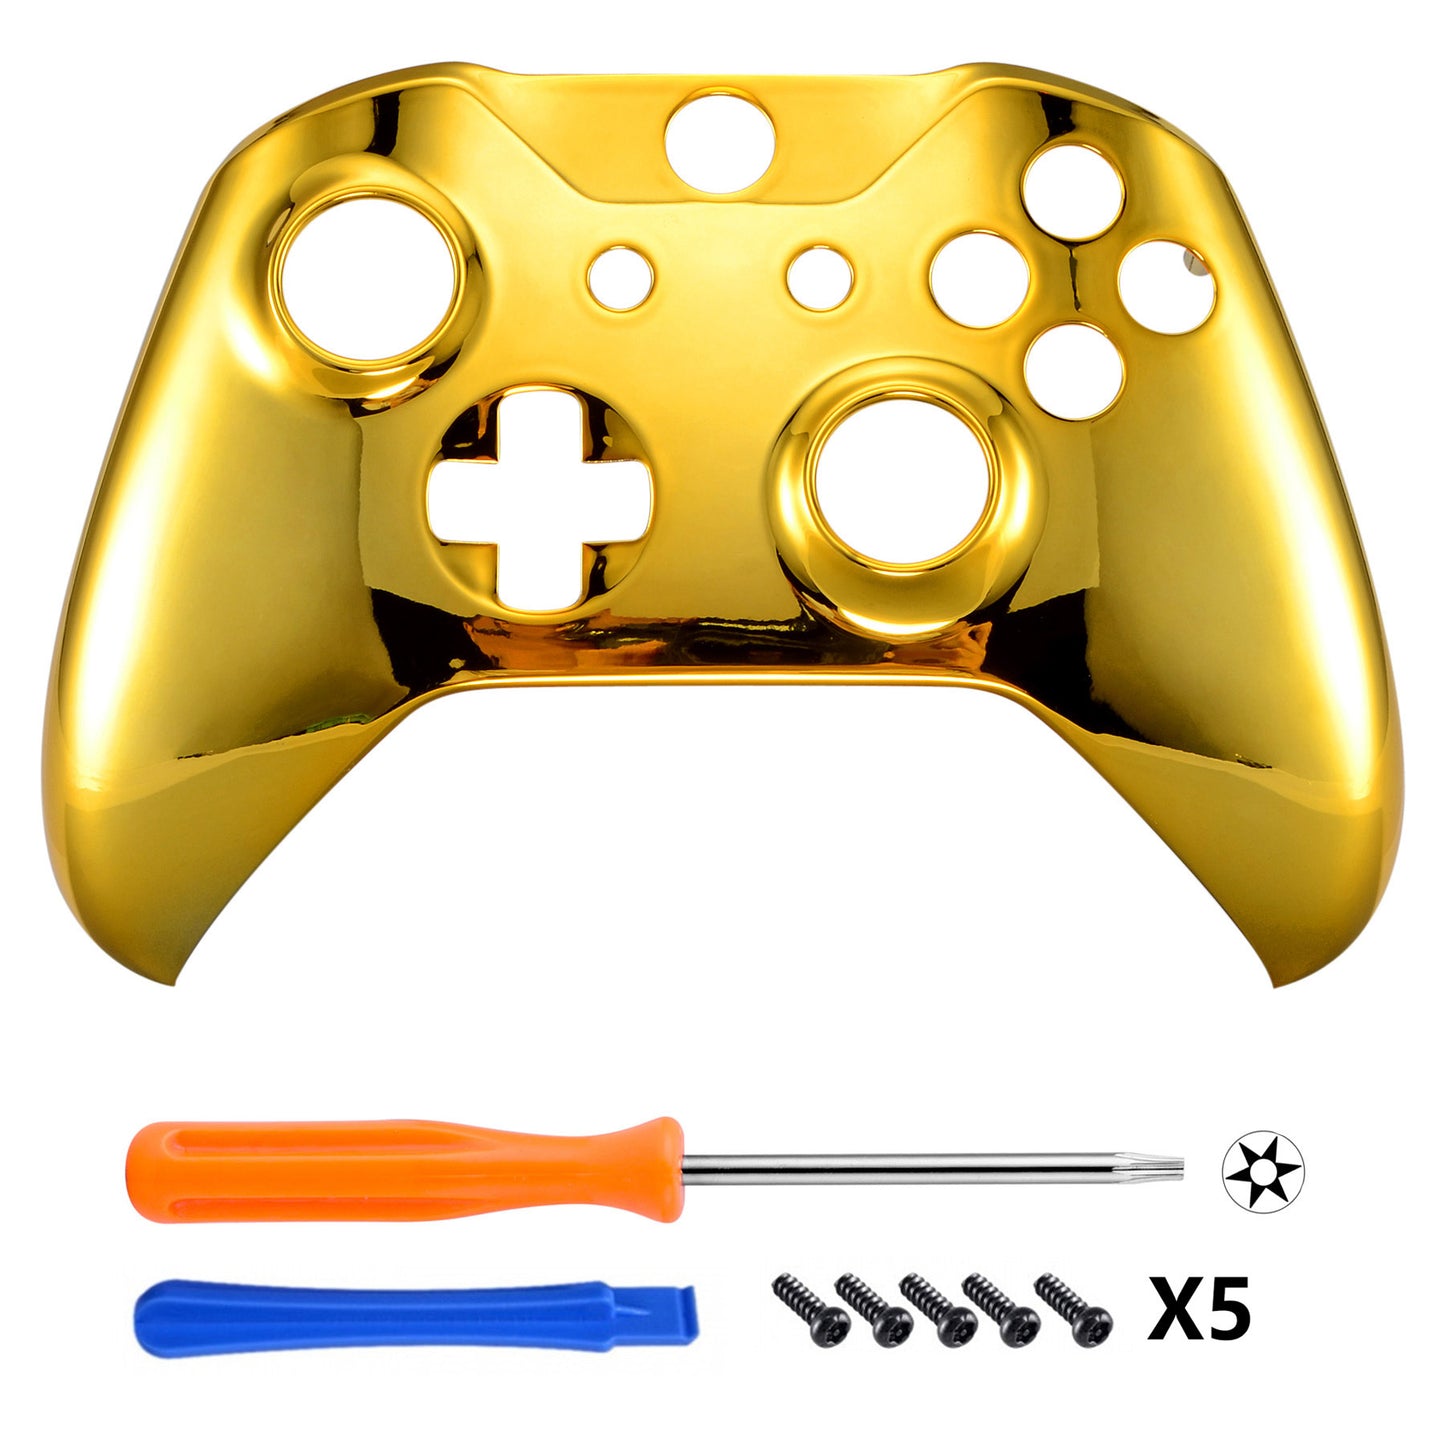 eXtremeRate Replacement Front Housing Shell for Xbox One X & S Controller (Model 1708) - Chrome Gold eXtremeRate